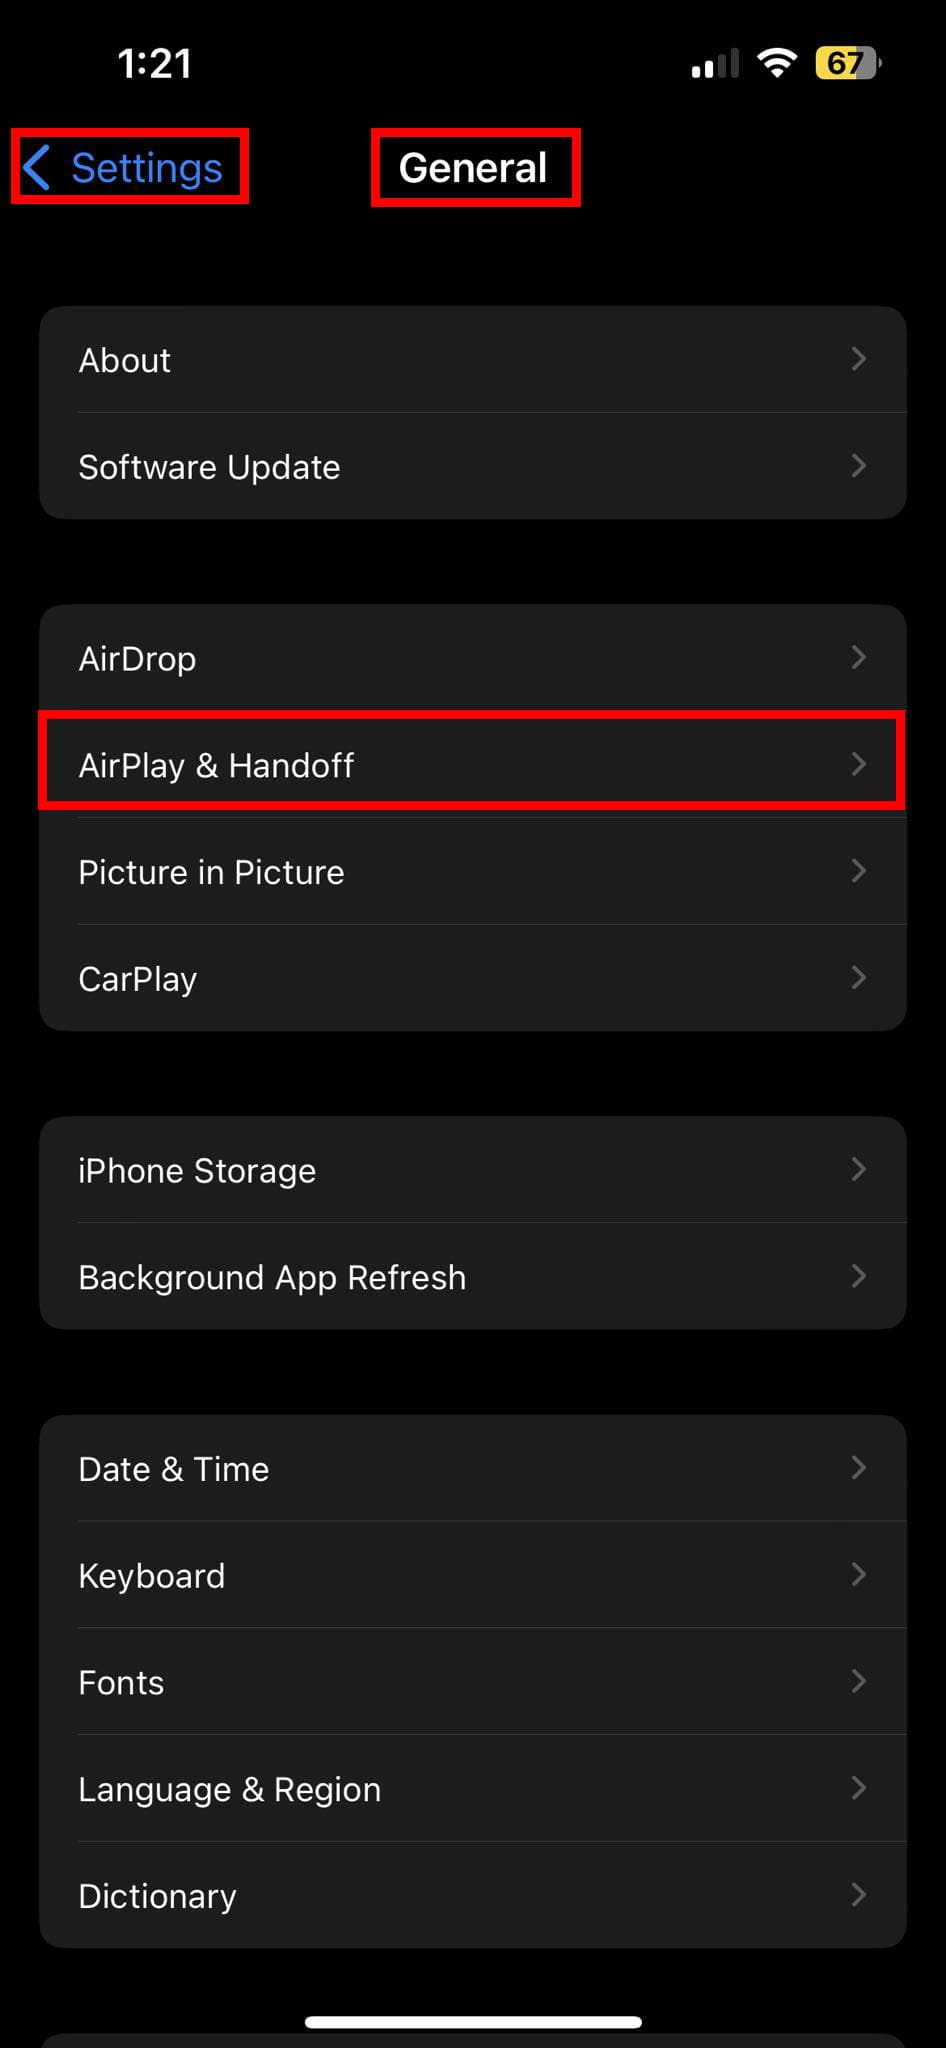 General AirPlay and Handoff